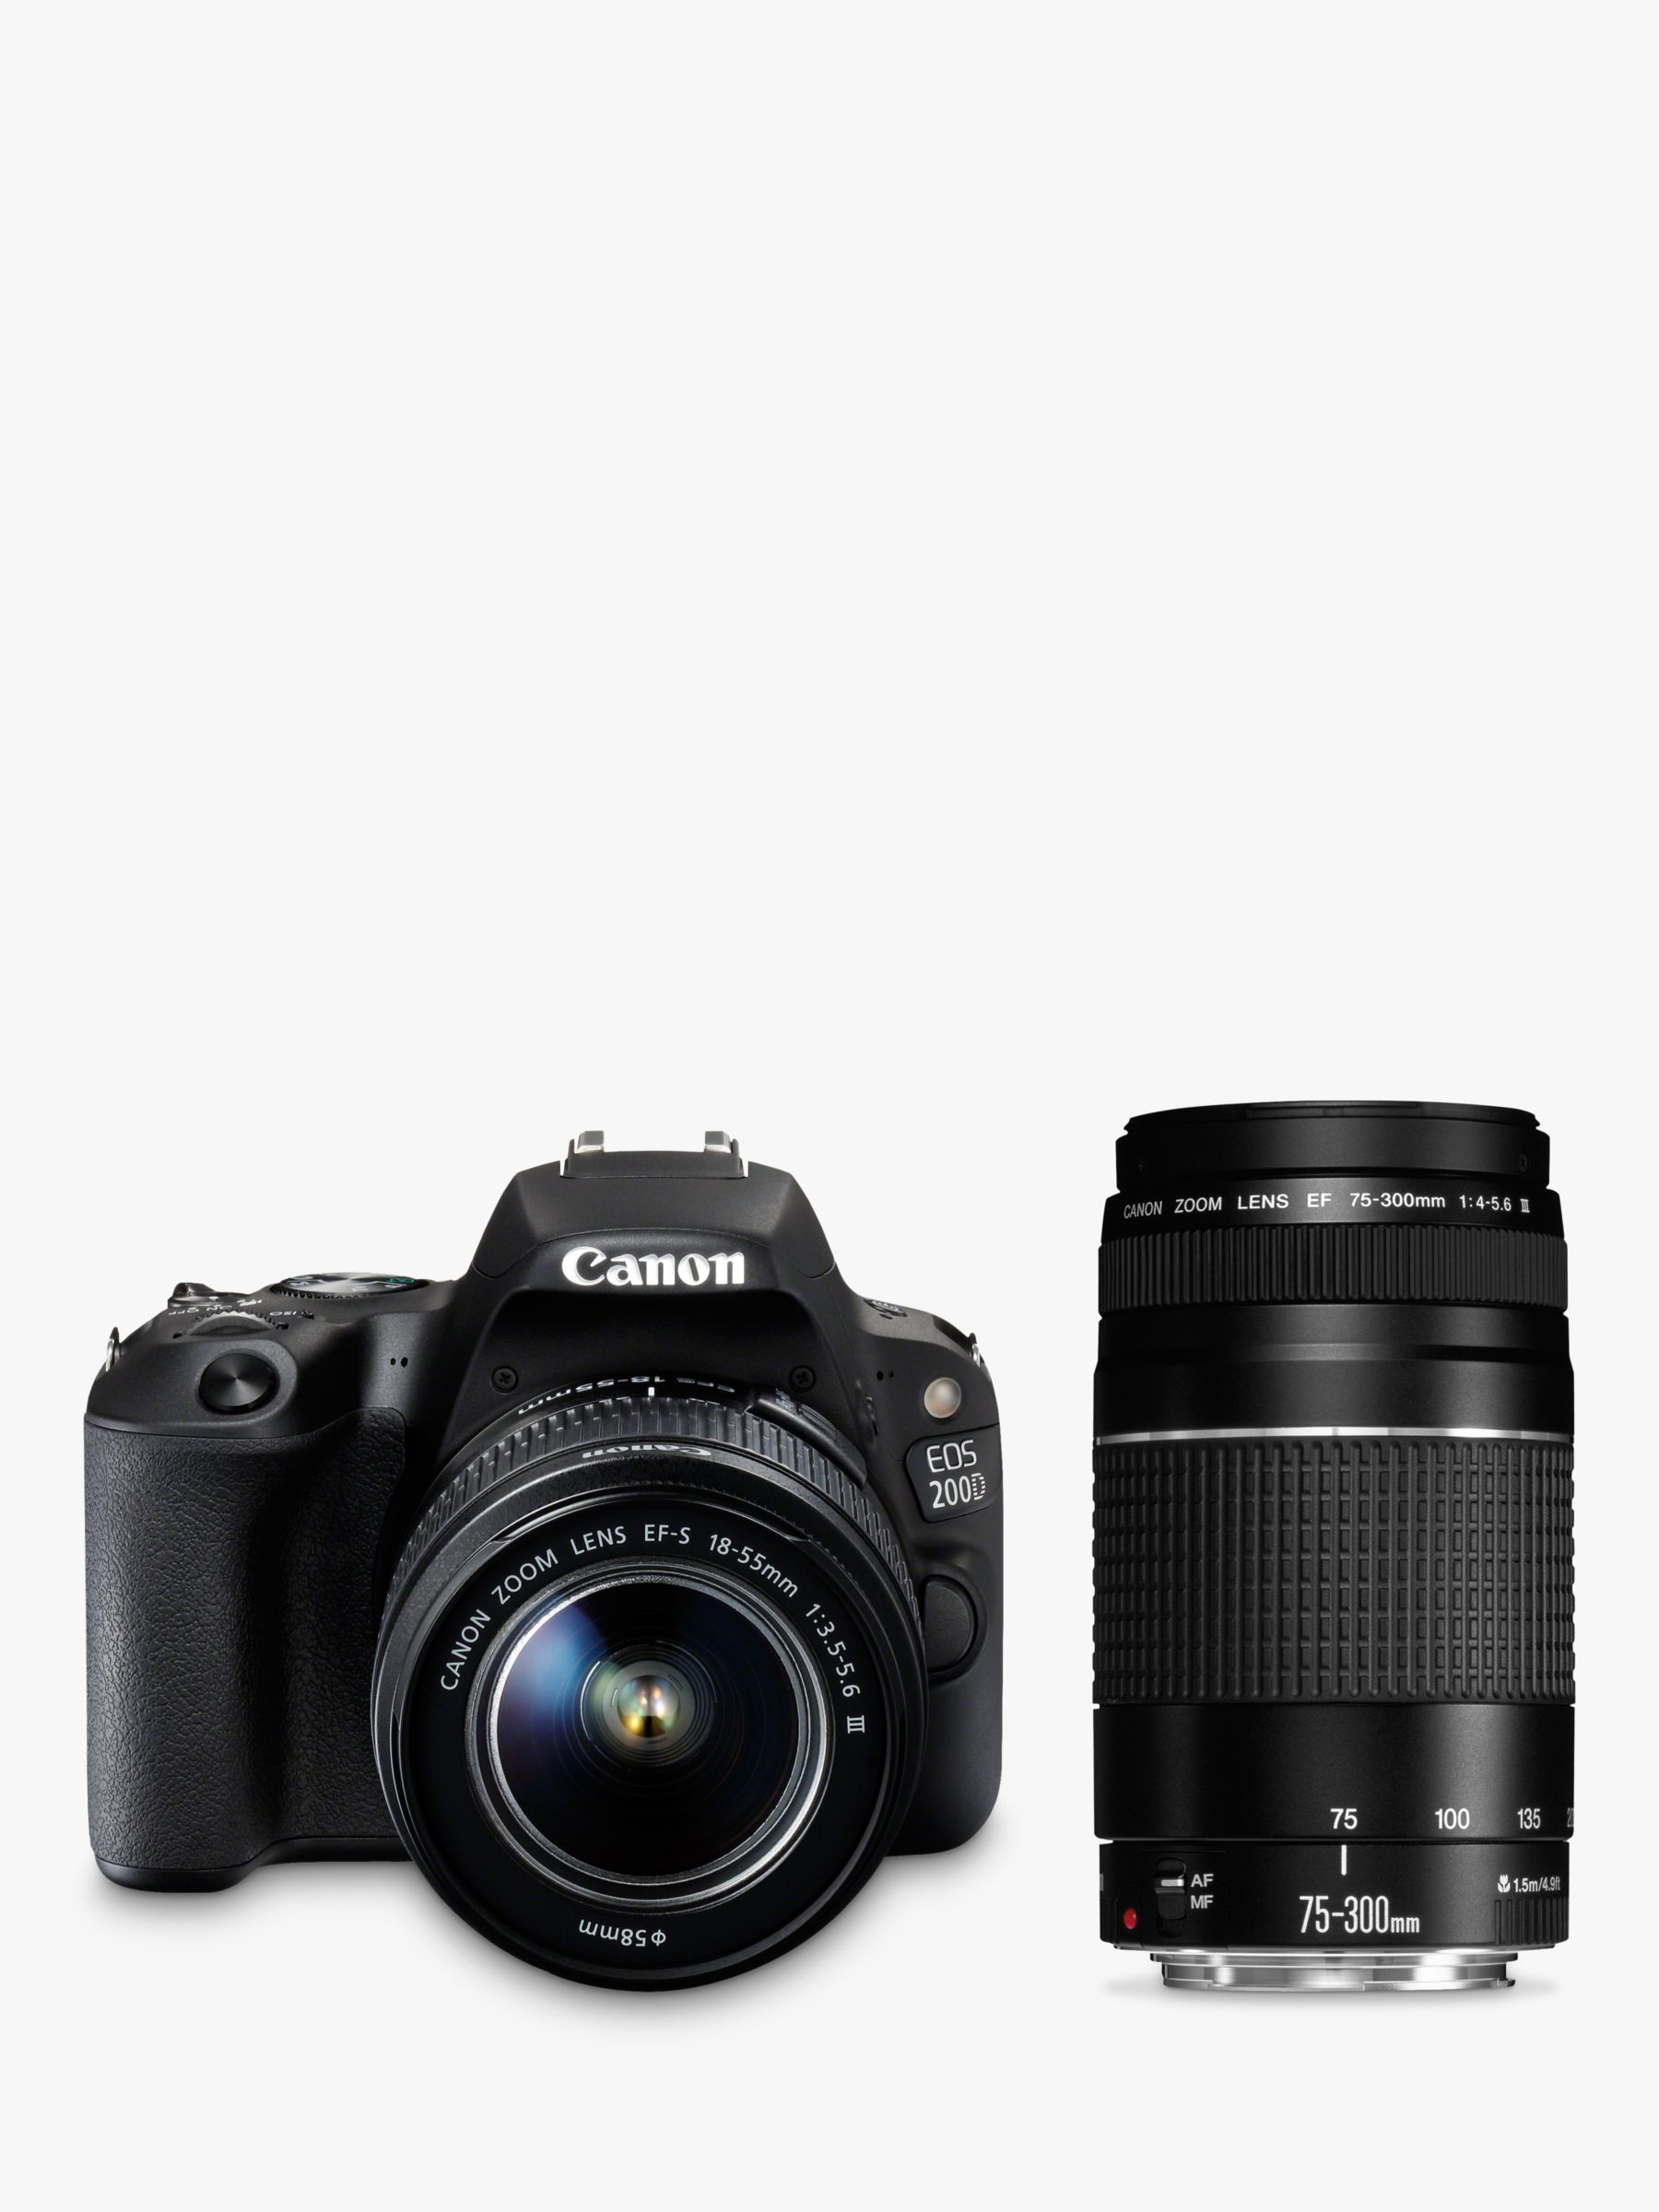 Canon EOS 200D Digital SLR Camera with 18-55mm f/3.5-5.6 III & EF 75-300mm f/4-5.6 III Lenses, 1080p Full HD, 24.2MP, Wi-Fi, Bluetooth, NFC, Optical Viewfinder, 3 Vari-angle Touch Screen, Double Zoom Kit, Black